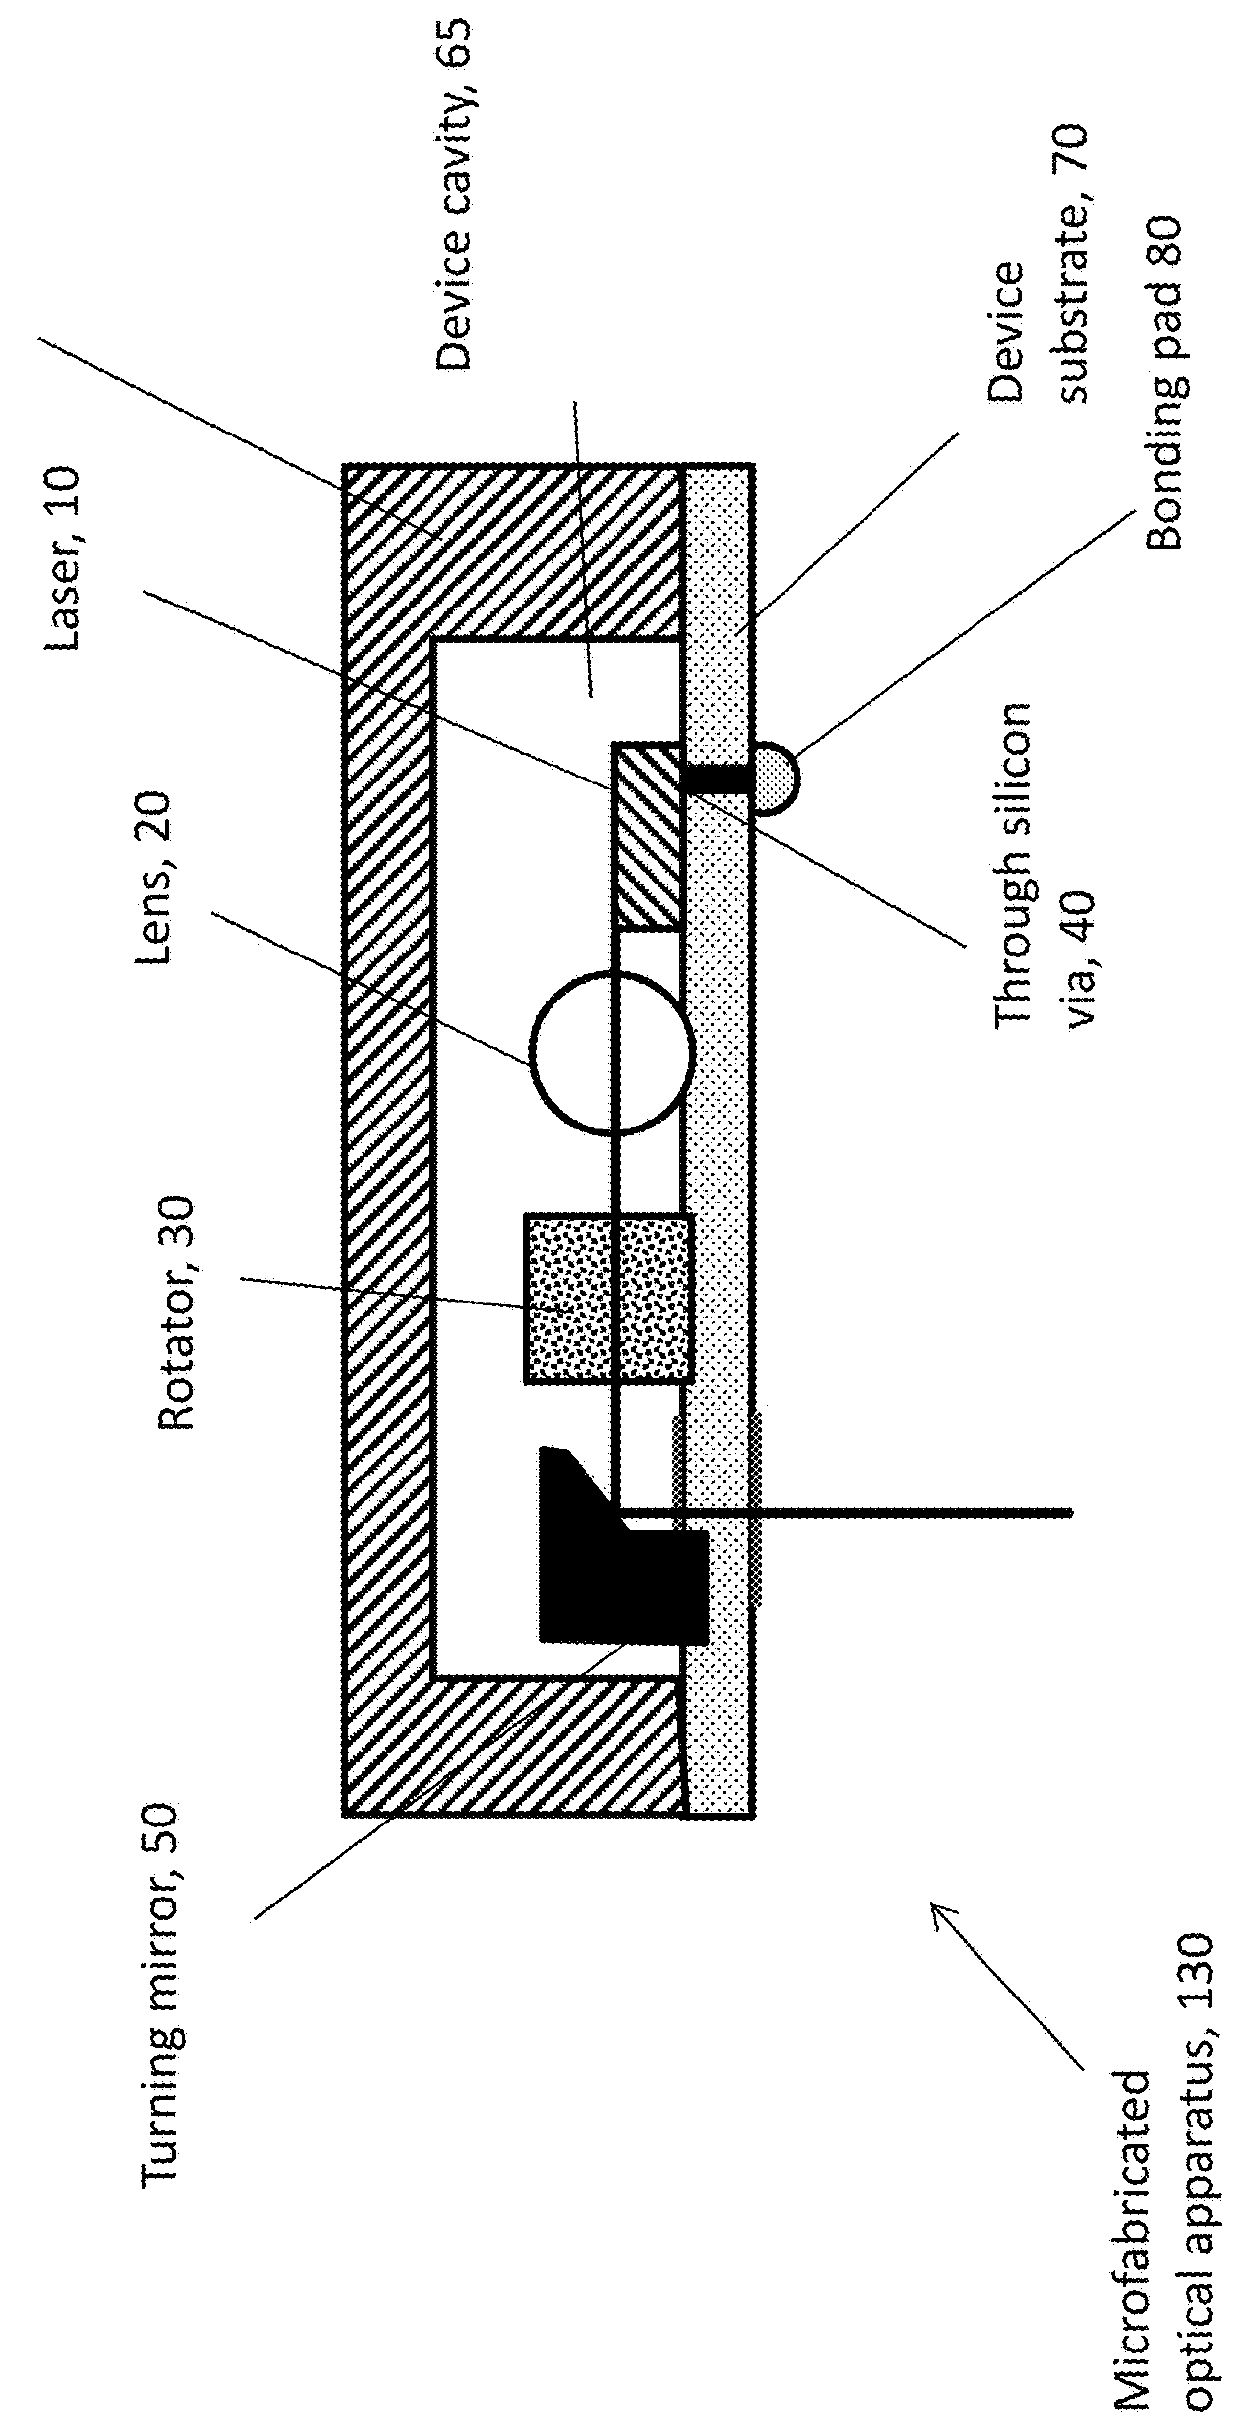 Microfabricated optical apparatus with flexible electrical connector